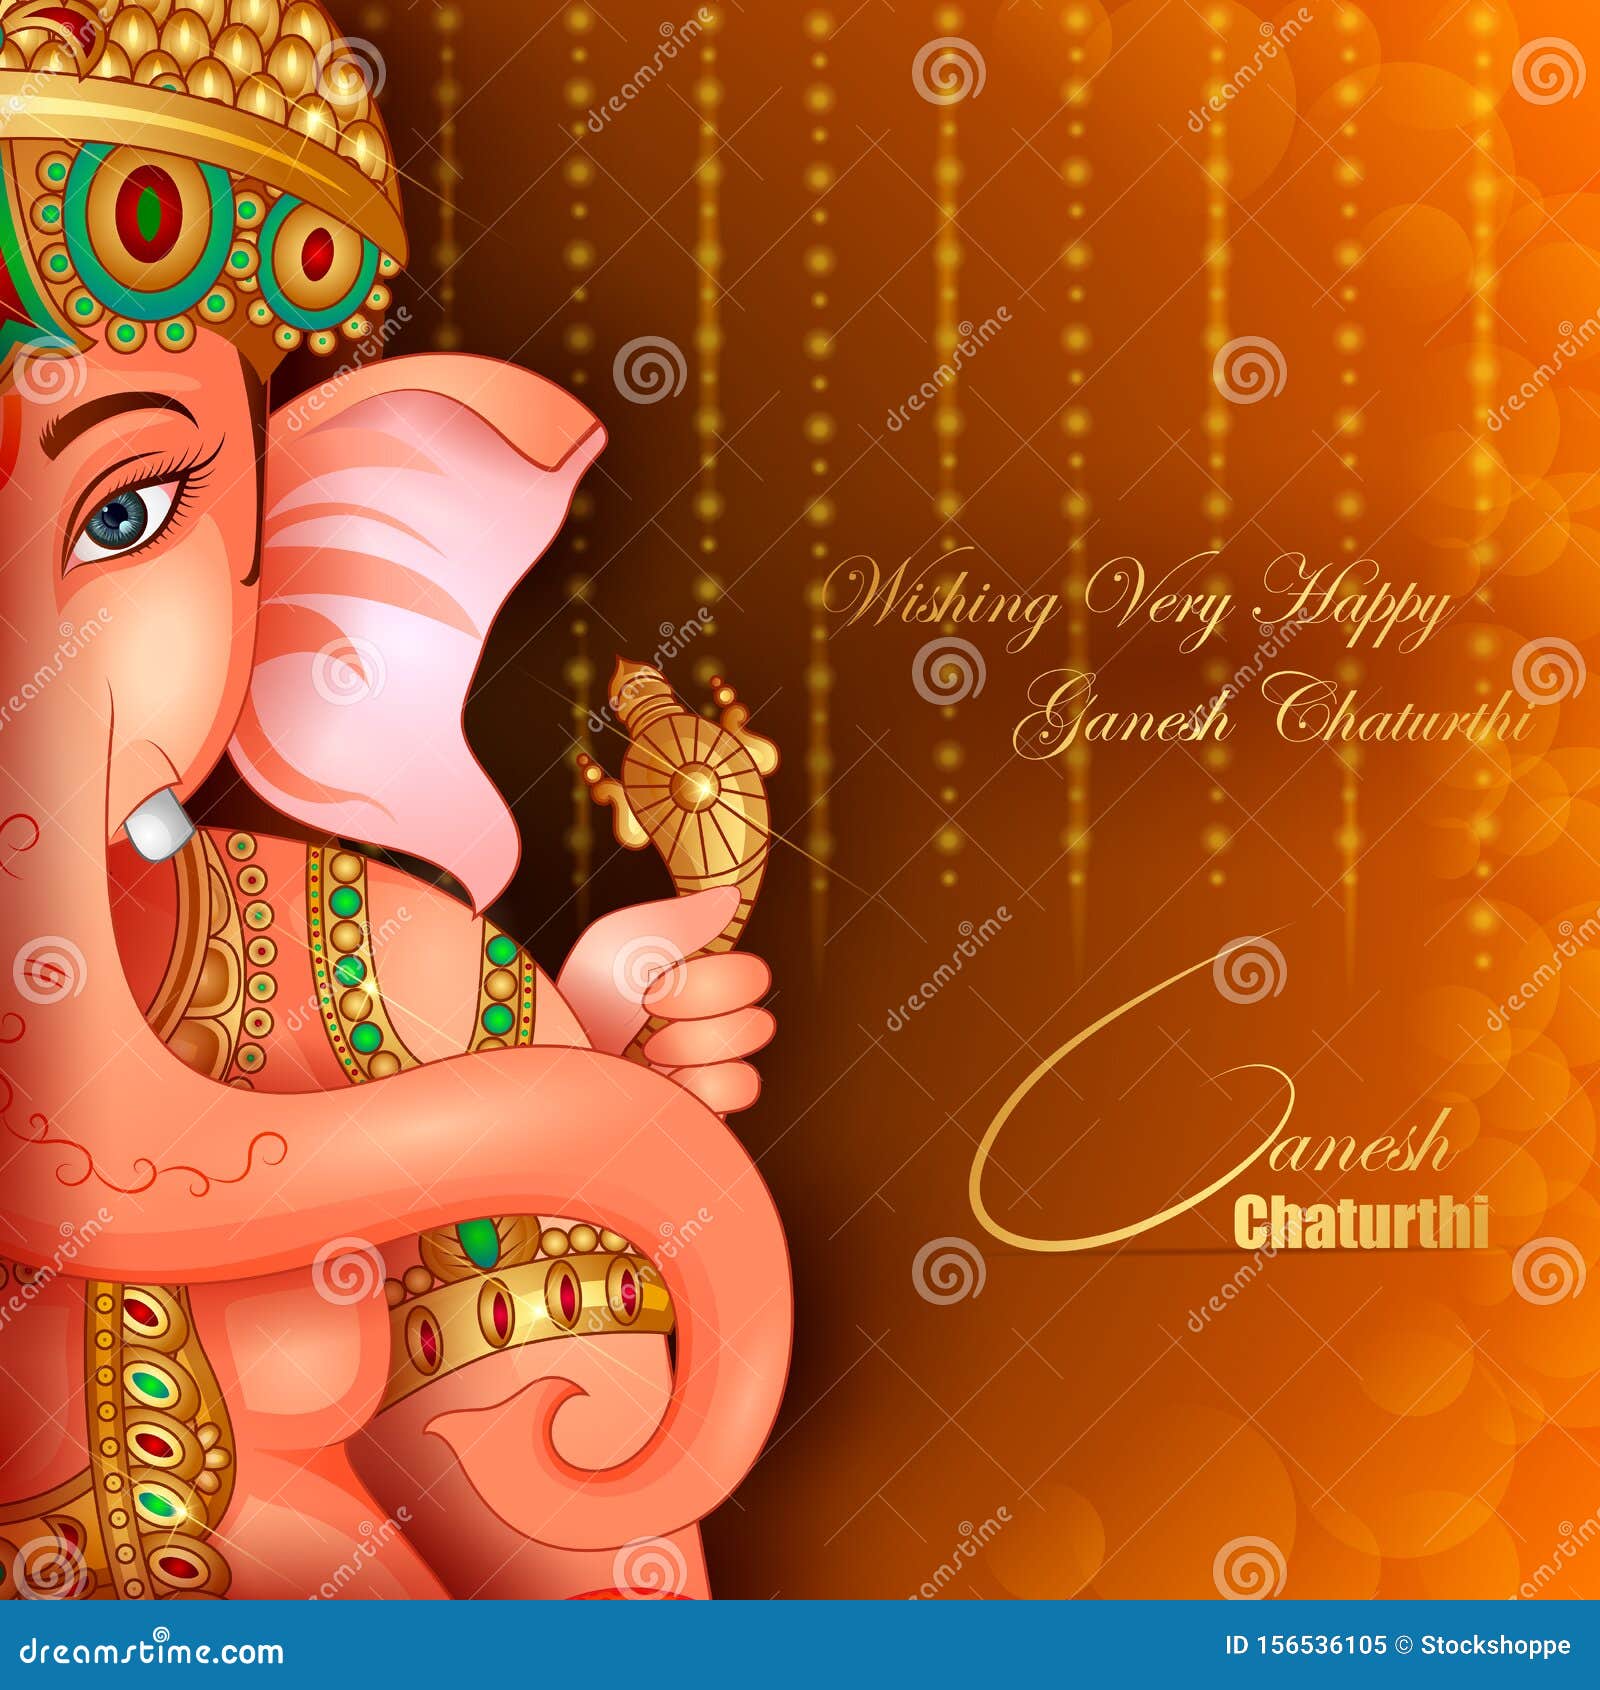 Lord Ganapati for Happy Ganesh Chaturthi Festival Religious Banner  Background Stock Vector - Illustration of deity, cultural: 156536105